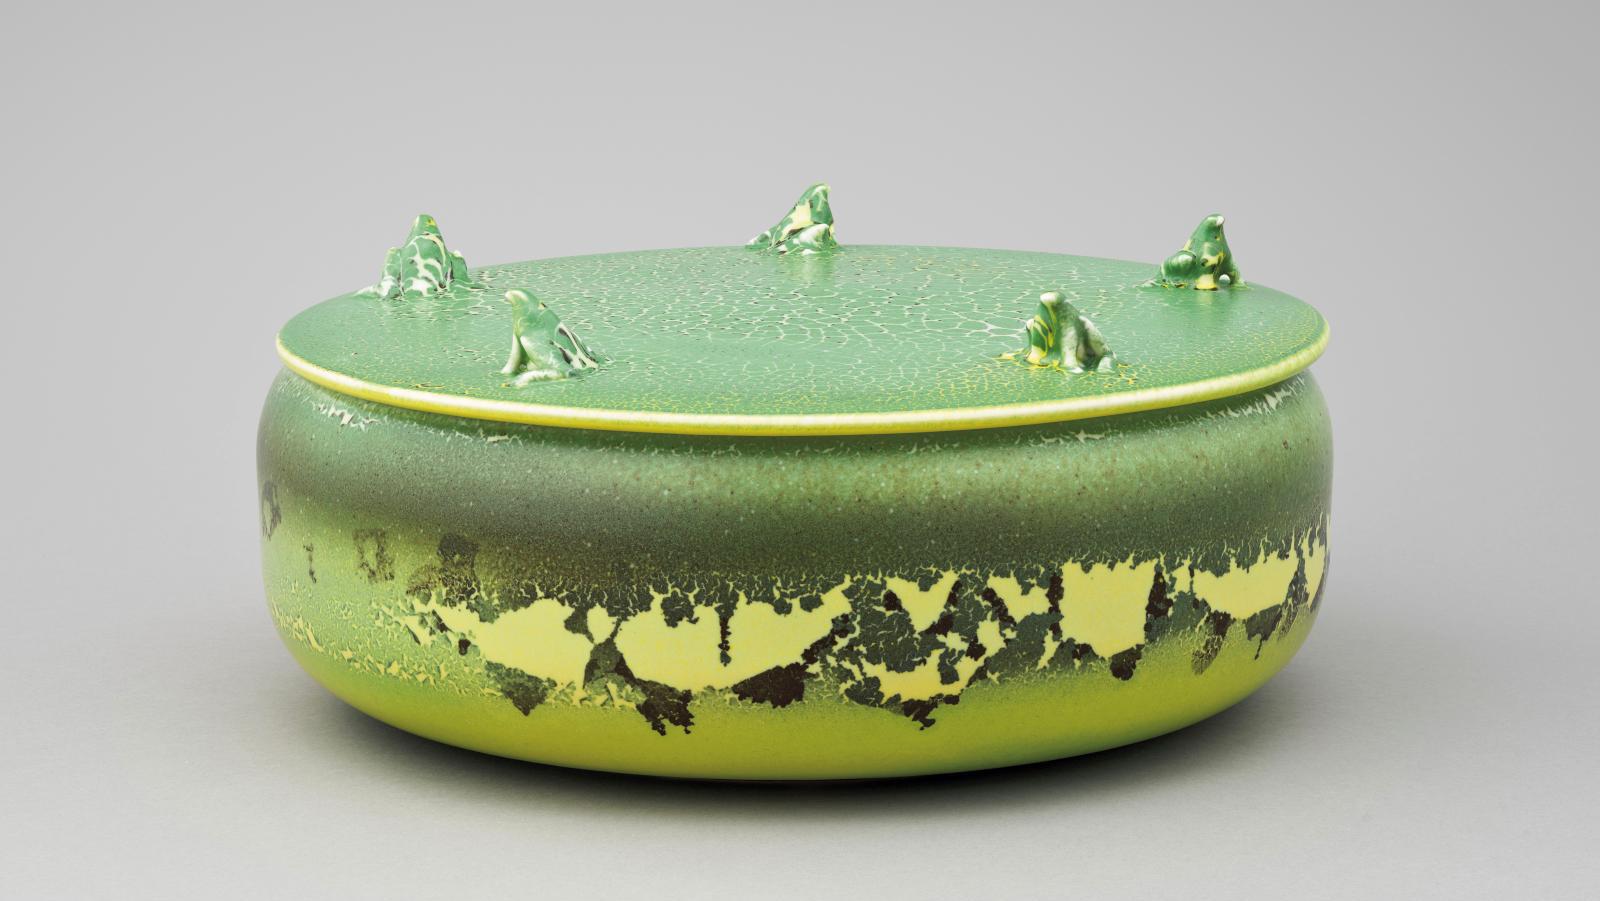 Jean Girel (b. 1947), Box with Frogs, 2013, hard-paste porcelain, 15 x 34 cm. Limoges,... Sèvres: The Living Forms of Ceramics